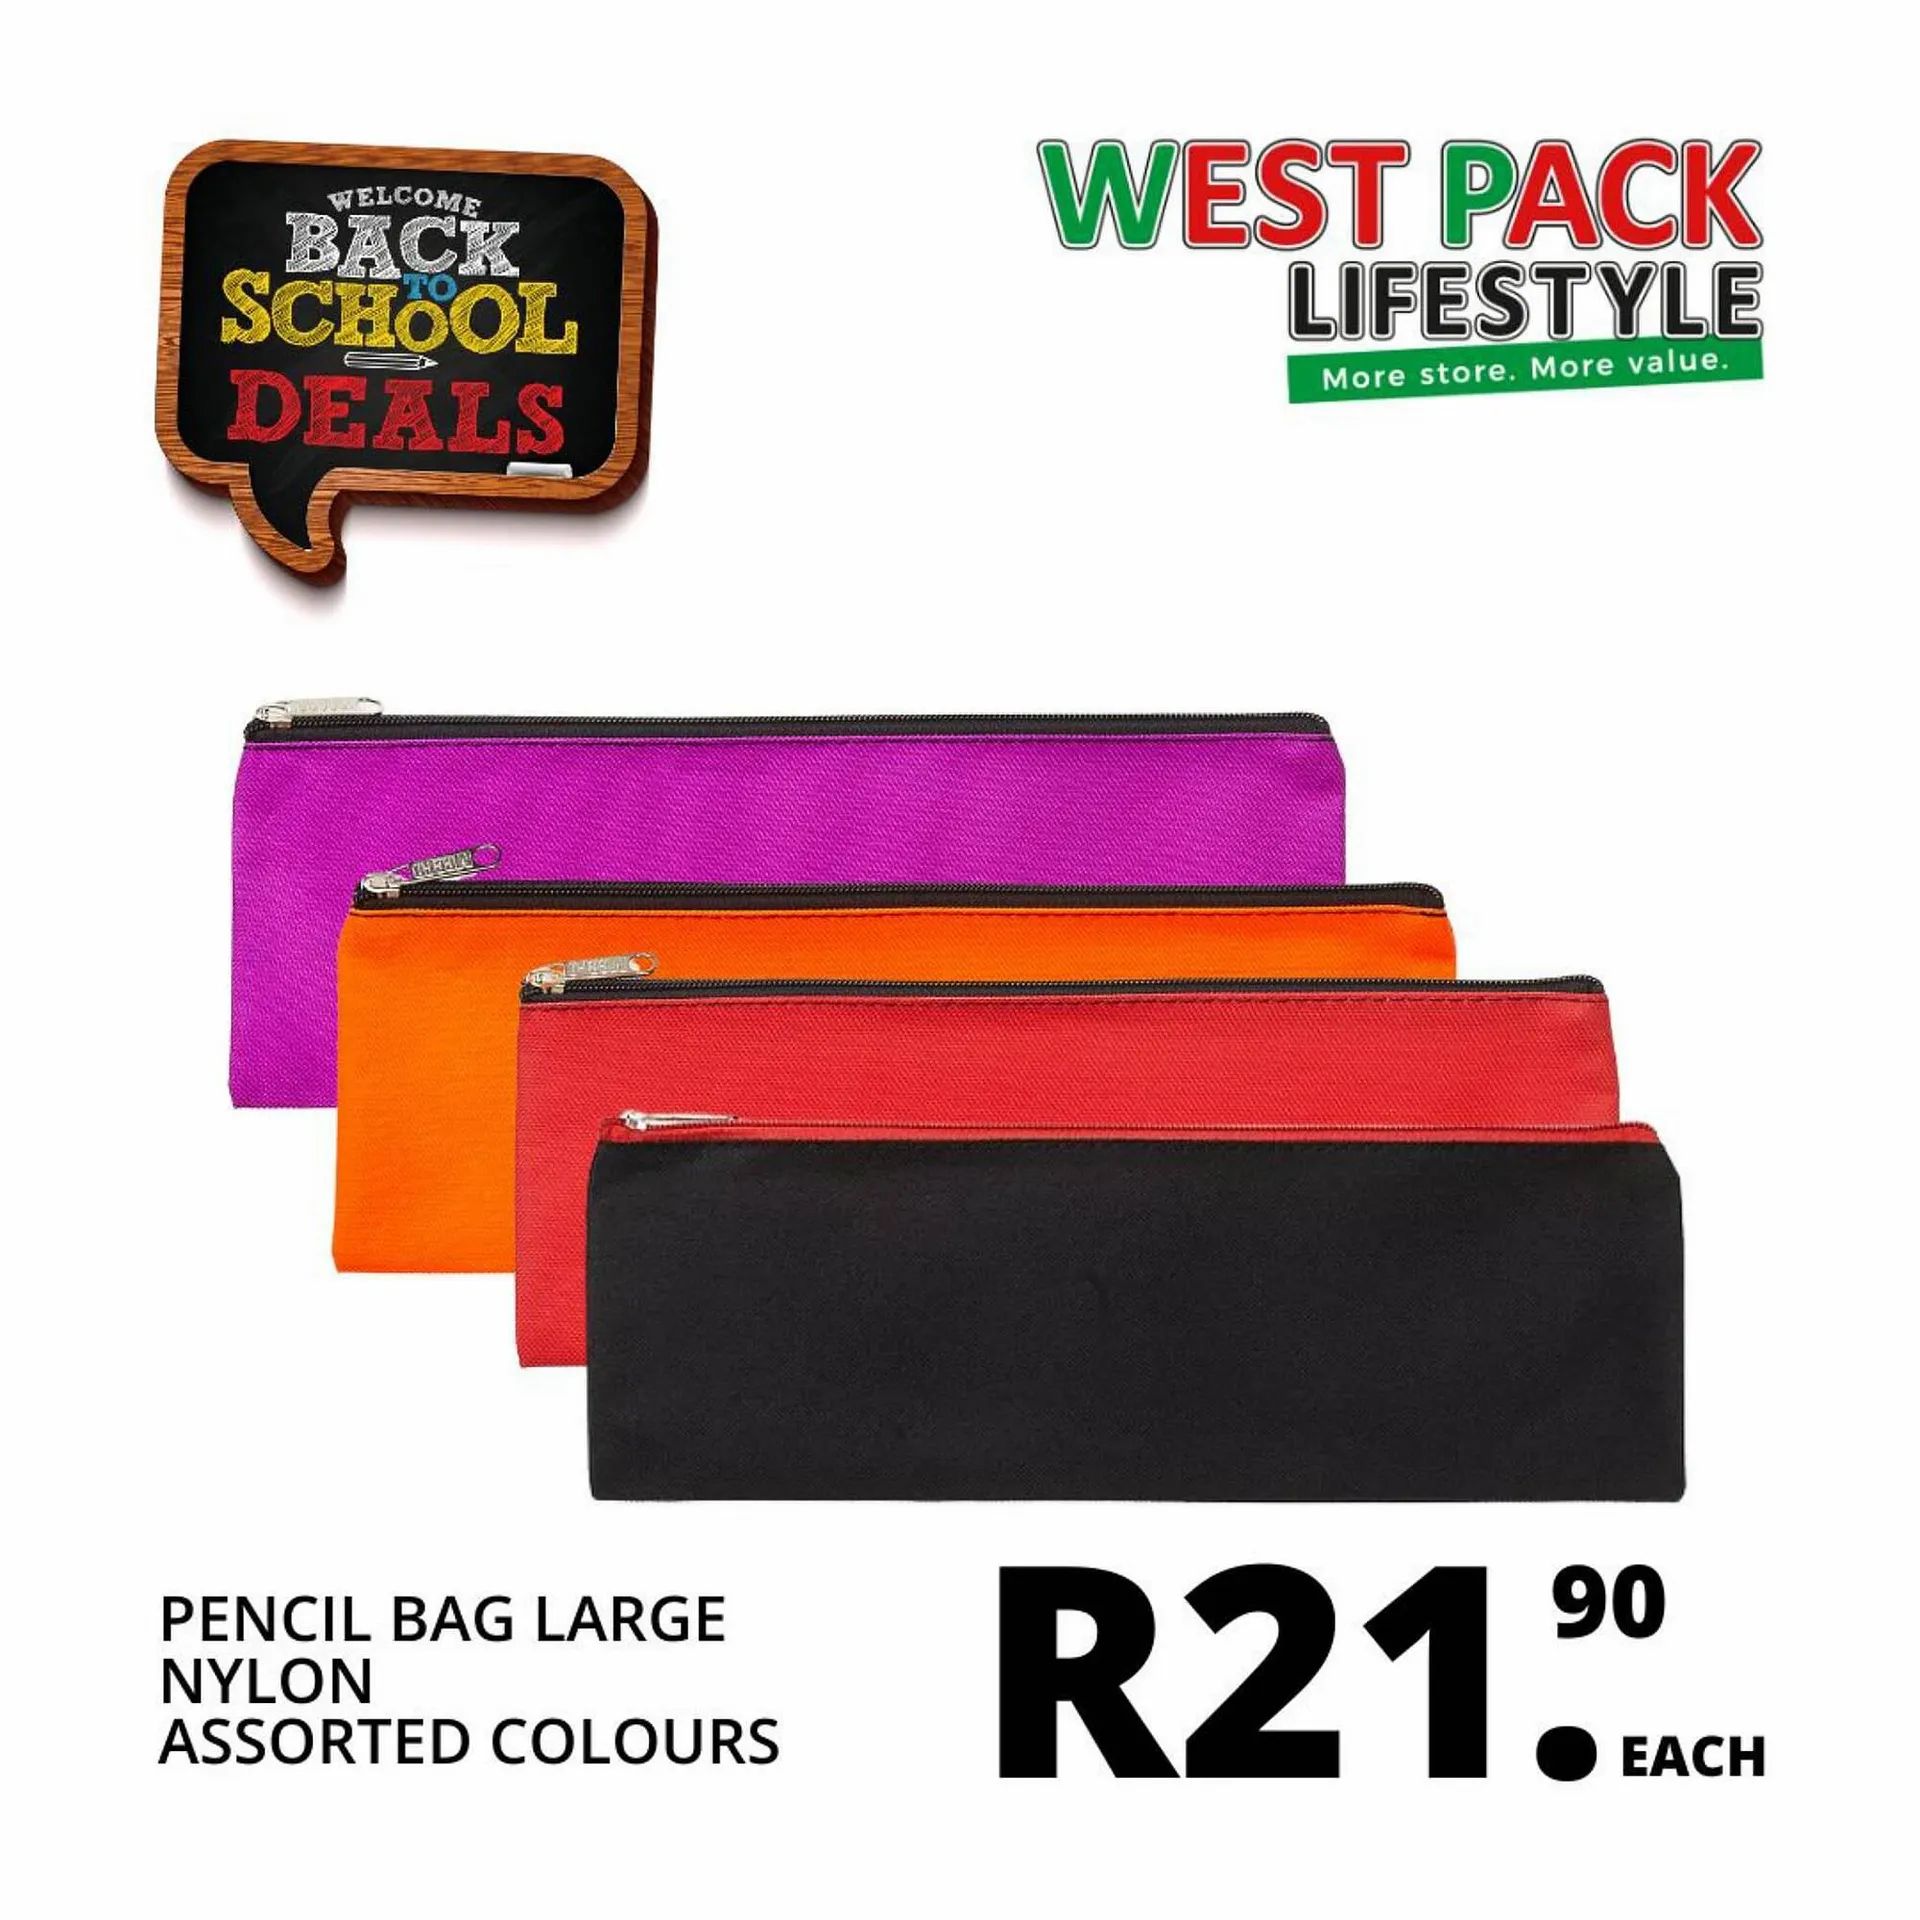 West Pack Lifestyle catalogue - 3